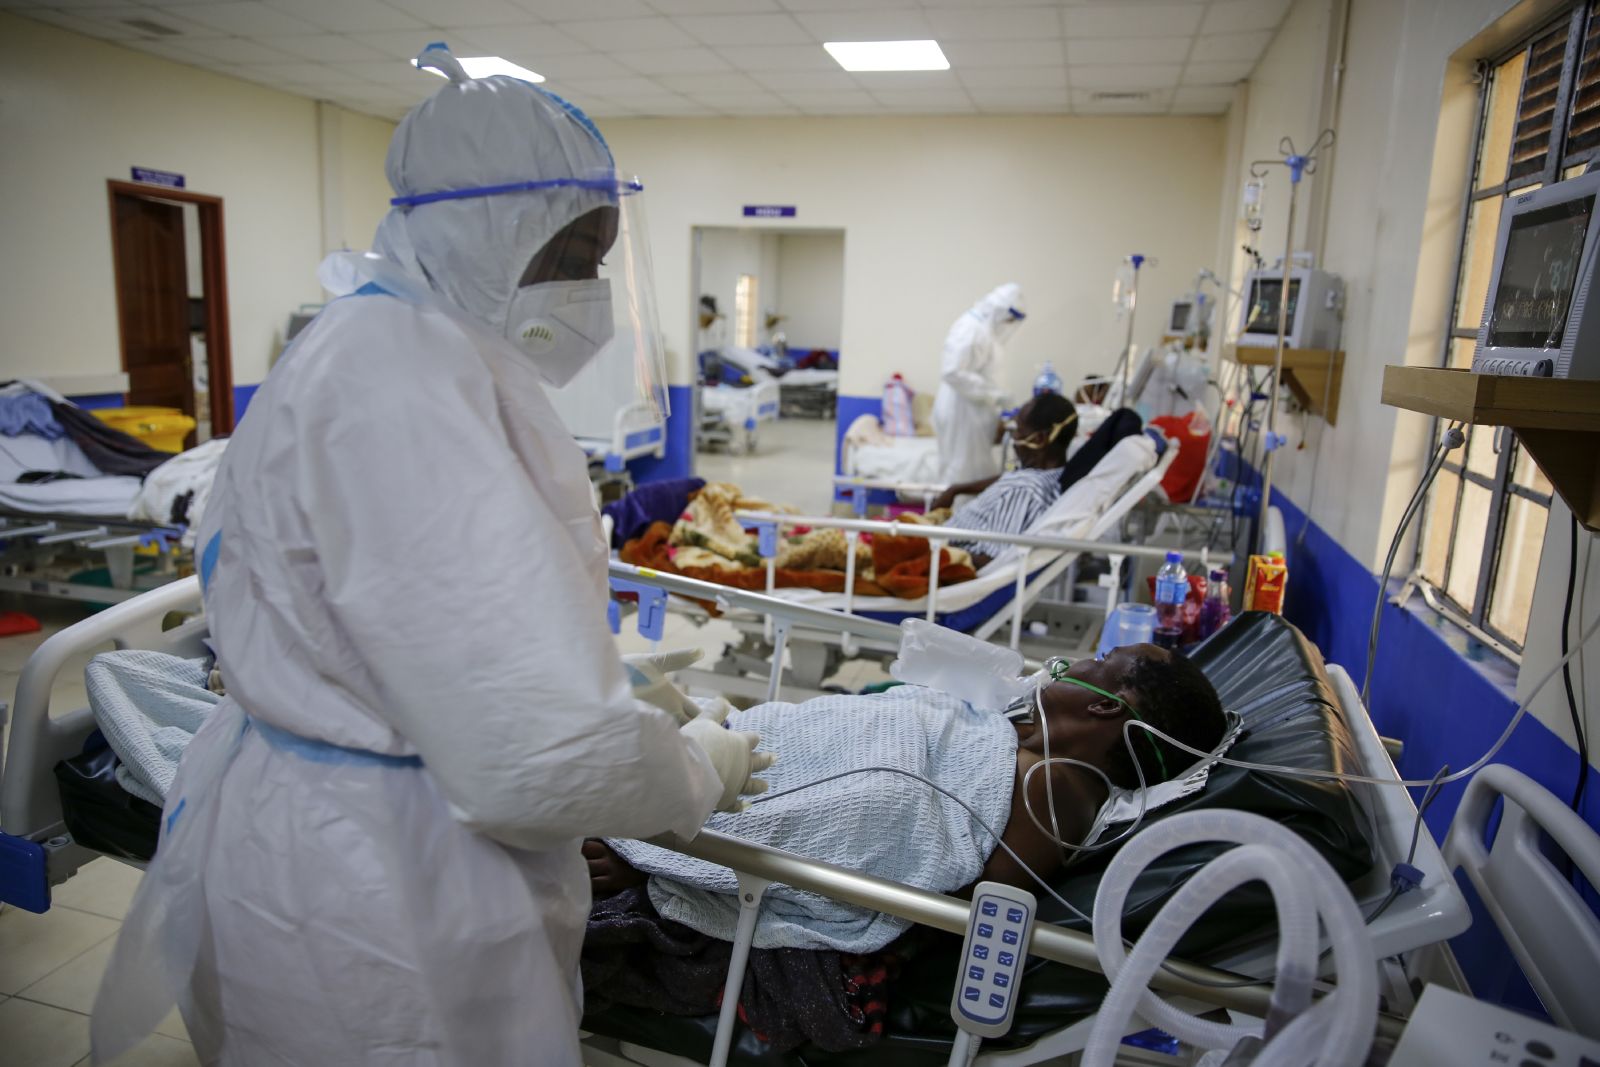 Masks, face shields, protective suits and test kits are badly needed in Kenya’s hospitals.